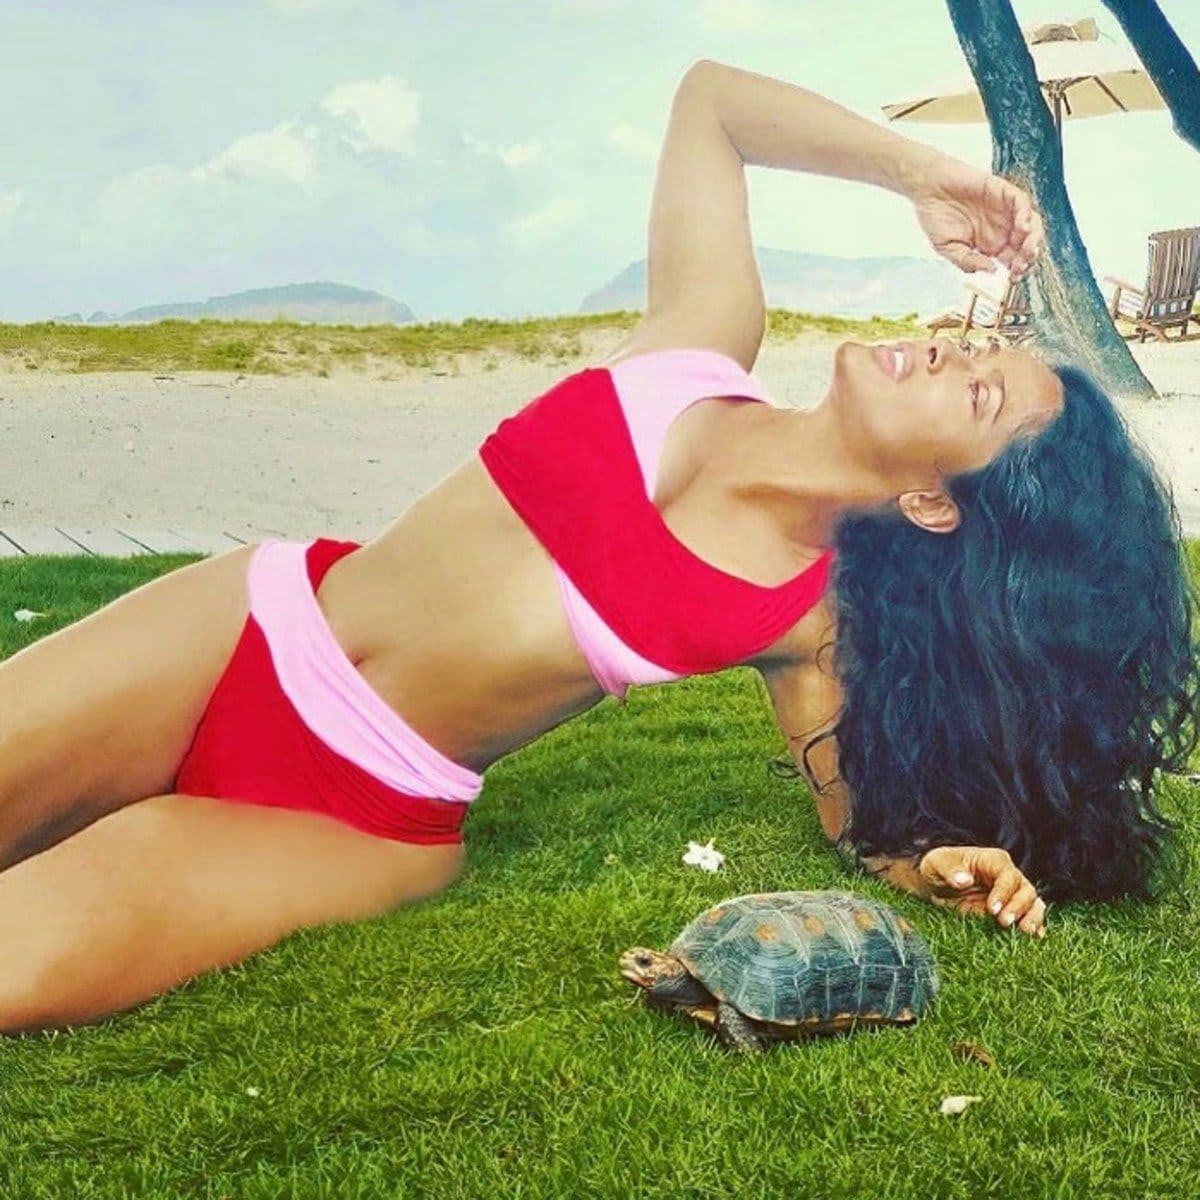 Salma Hayek poses with a turtle on her Instagram account